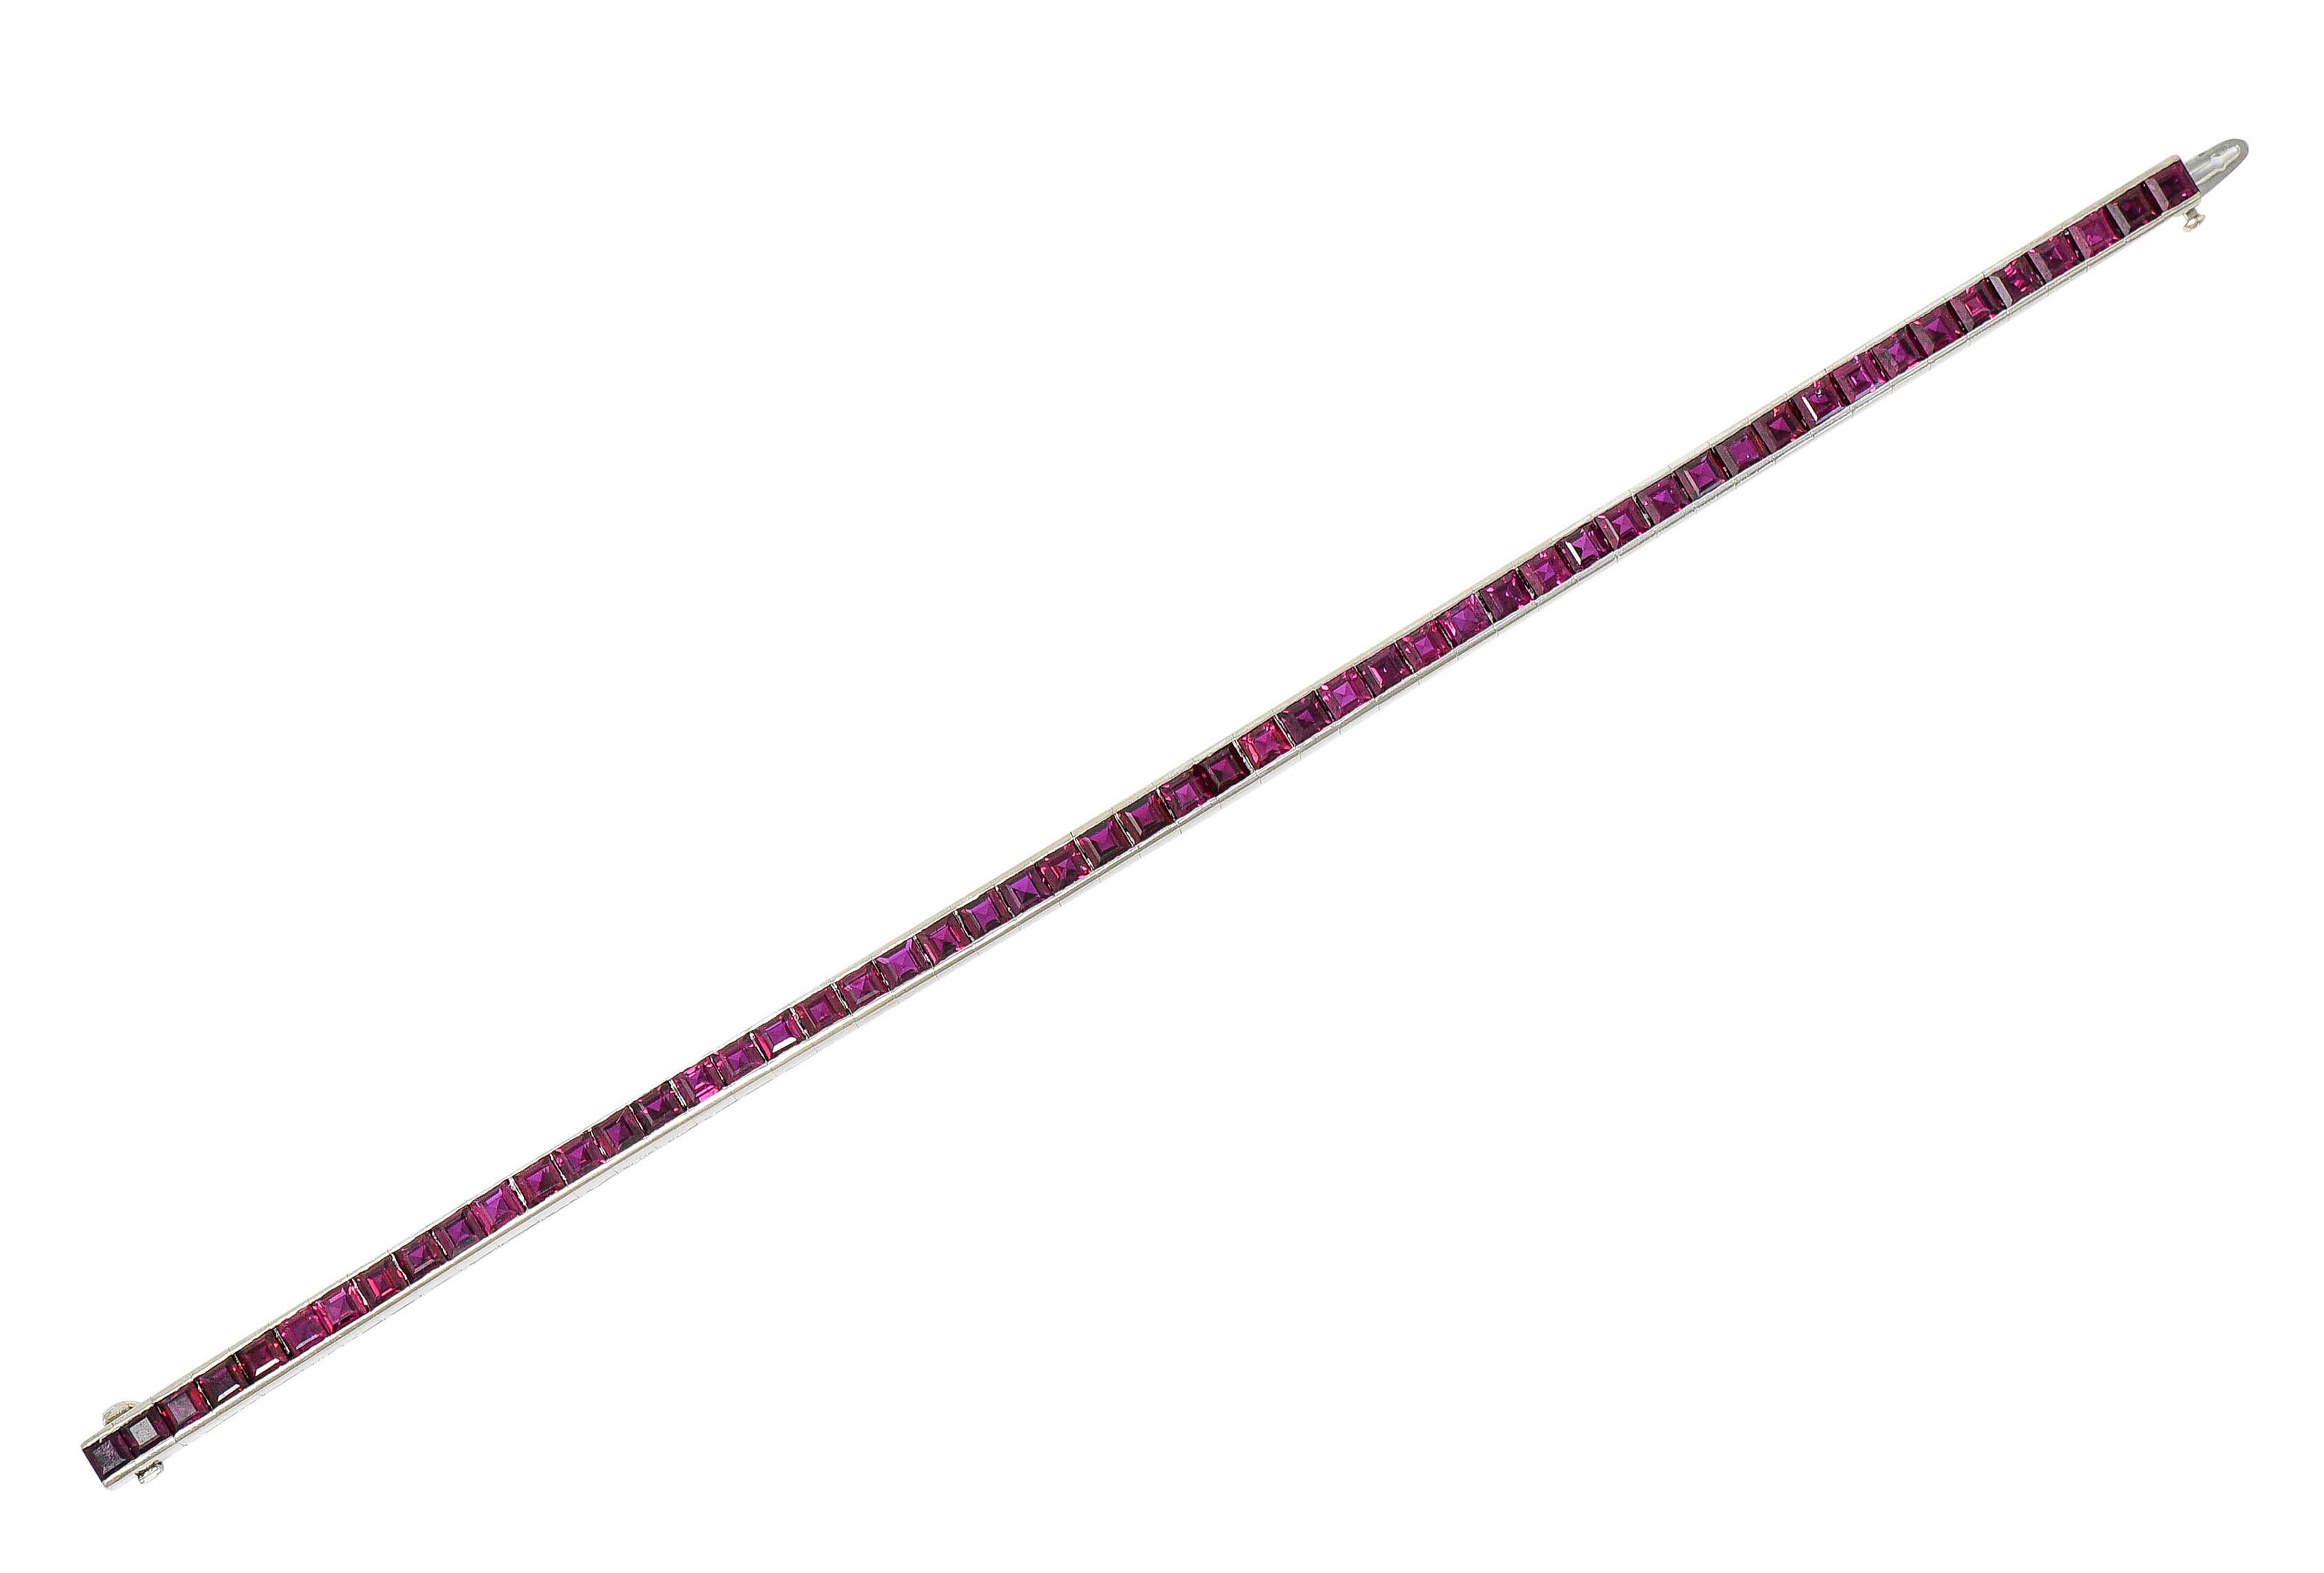 Line bracelet is comprised of channel set square links

Featuring well matched purplish red rubies weighing in total approximately 13.25 carats

Completed by a concealed clasp with fold over safety

Tested as platinum

Circa: 1940s

Length: 7 1/8